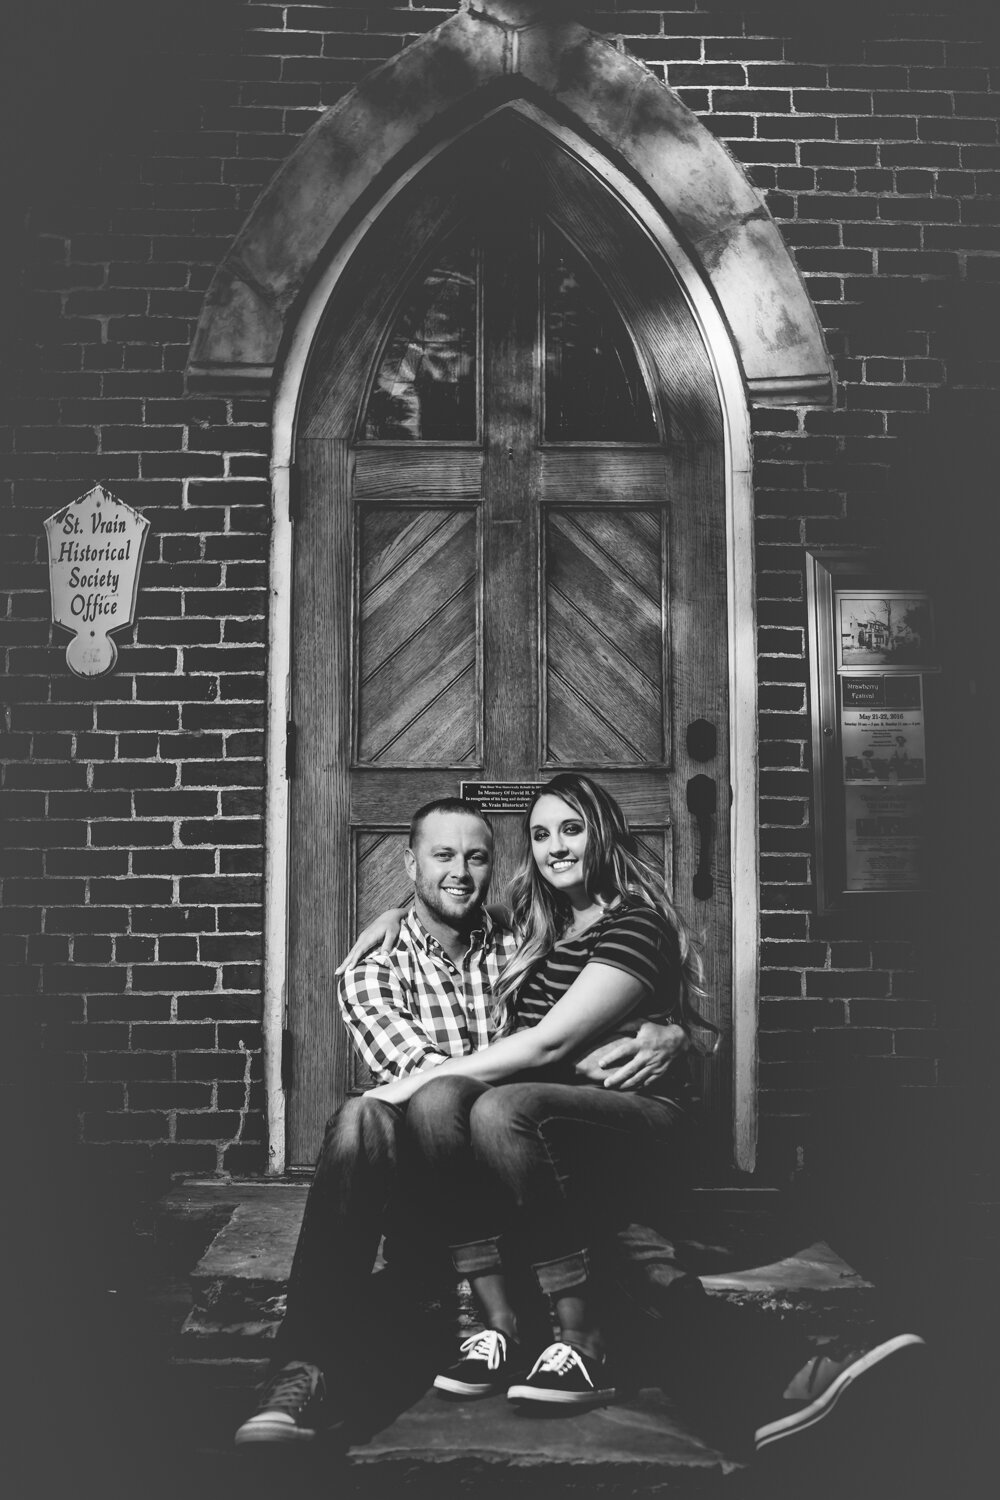  Old church door engagements in Longmont, Colorado. Take by Jared M. Gant 